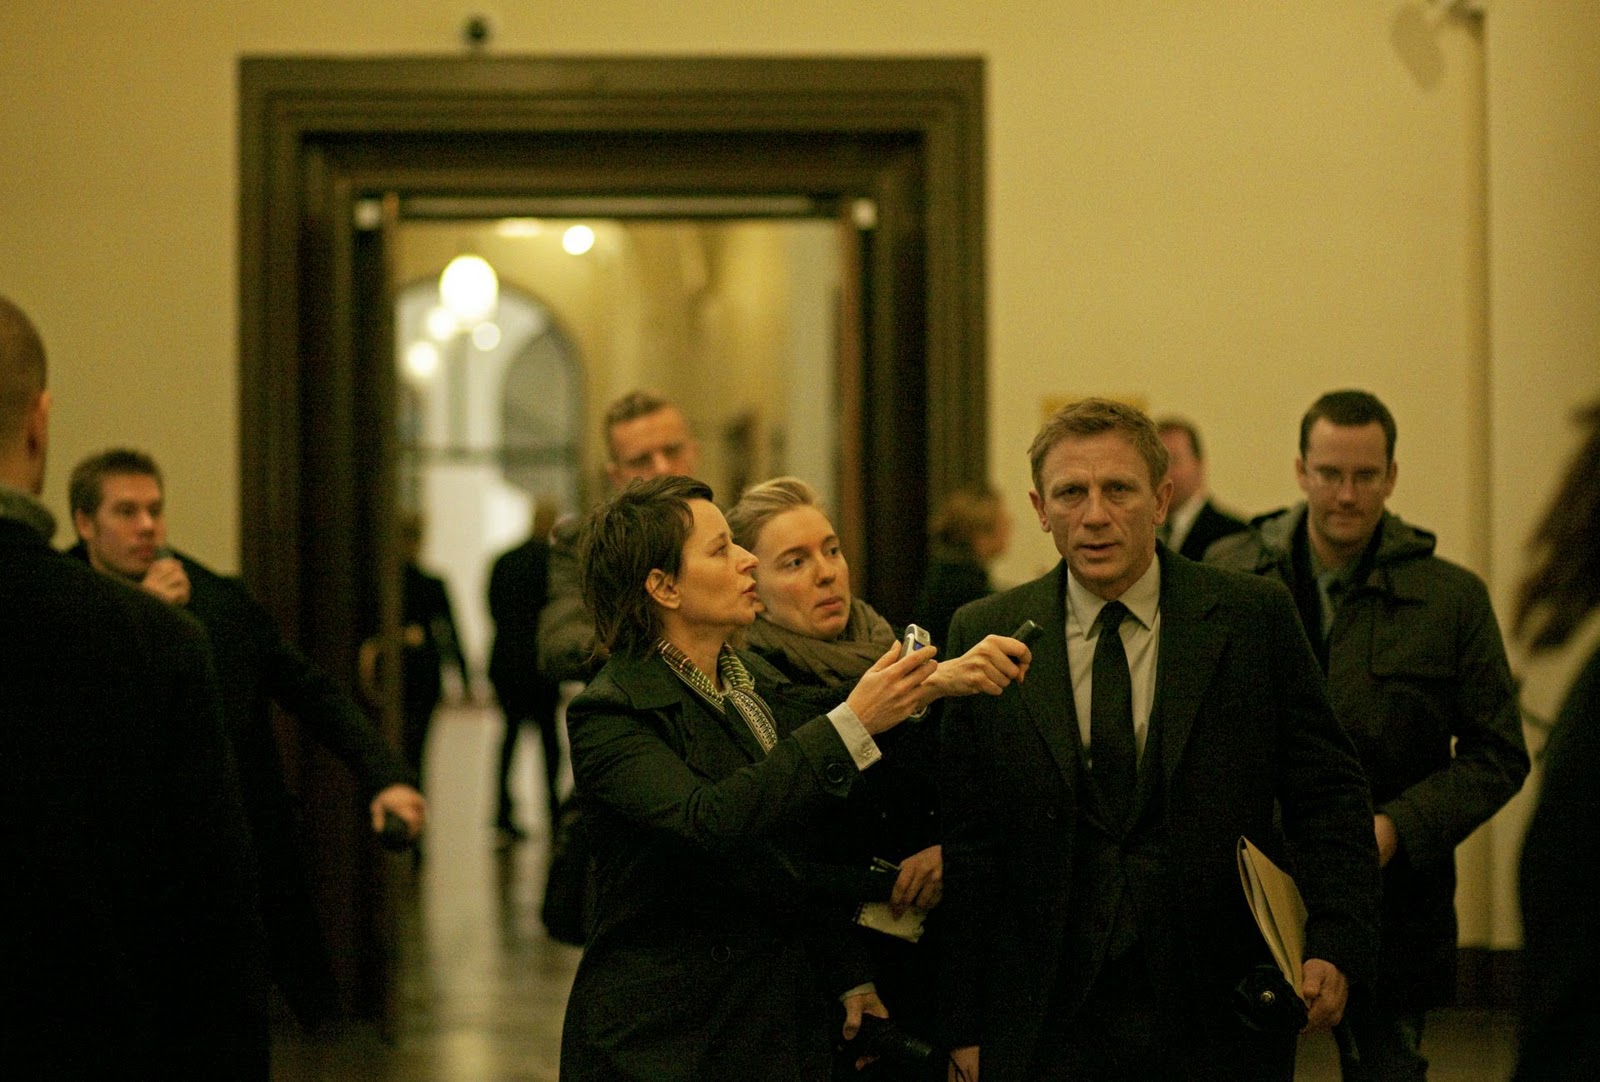 Review: "The Girl With the Dragon Tattoo" is a disappointingly dry,  mechanical adaptation